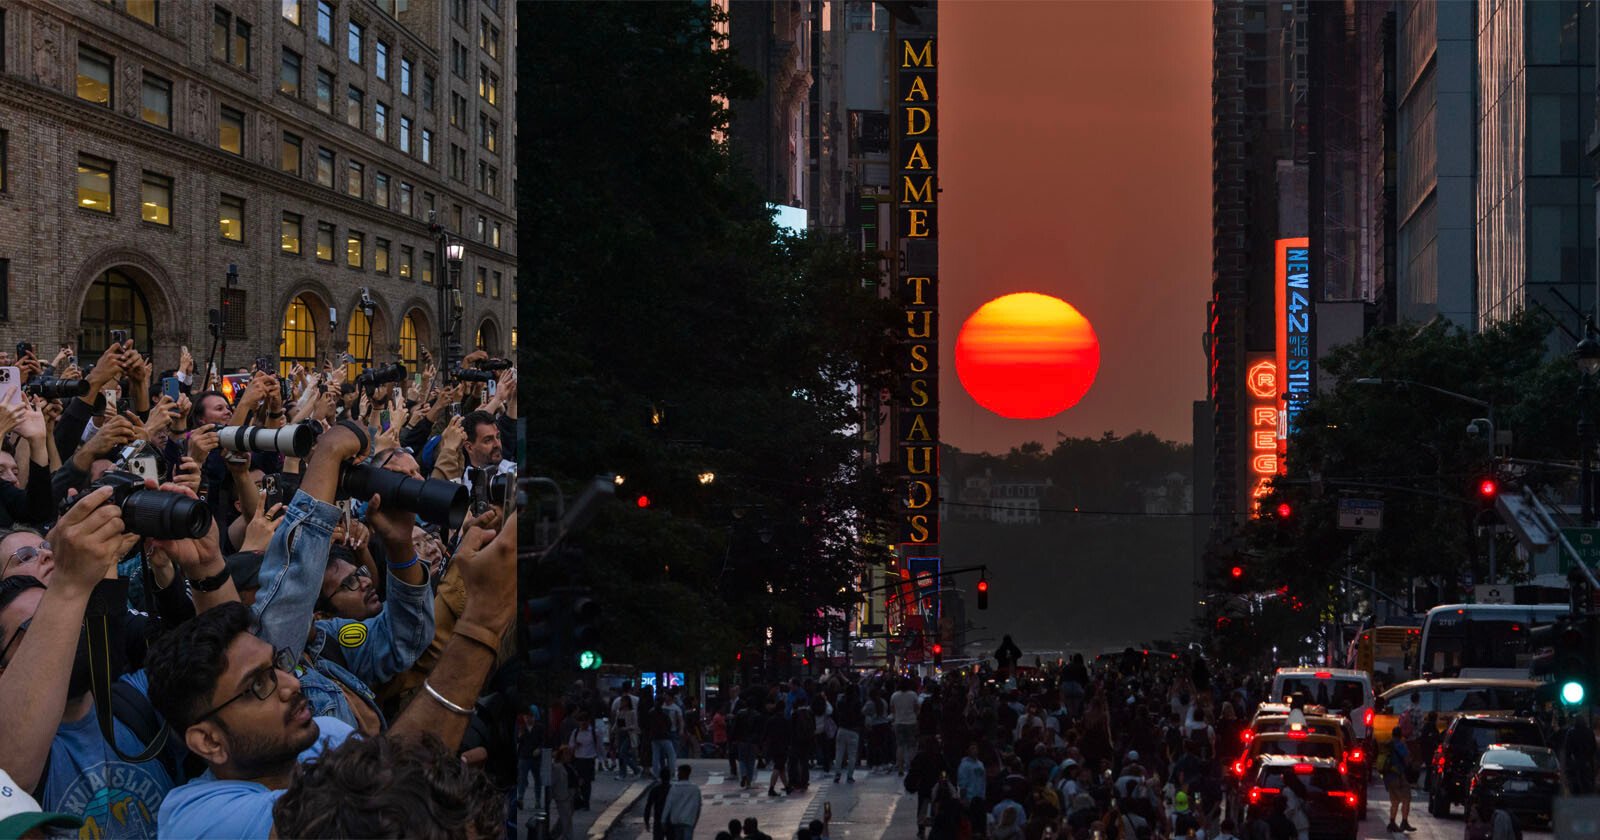 Thousands of Photographers Gather in New York for ‘Manhattanhenge